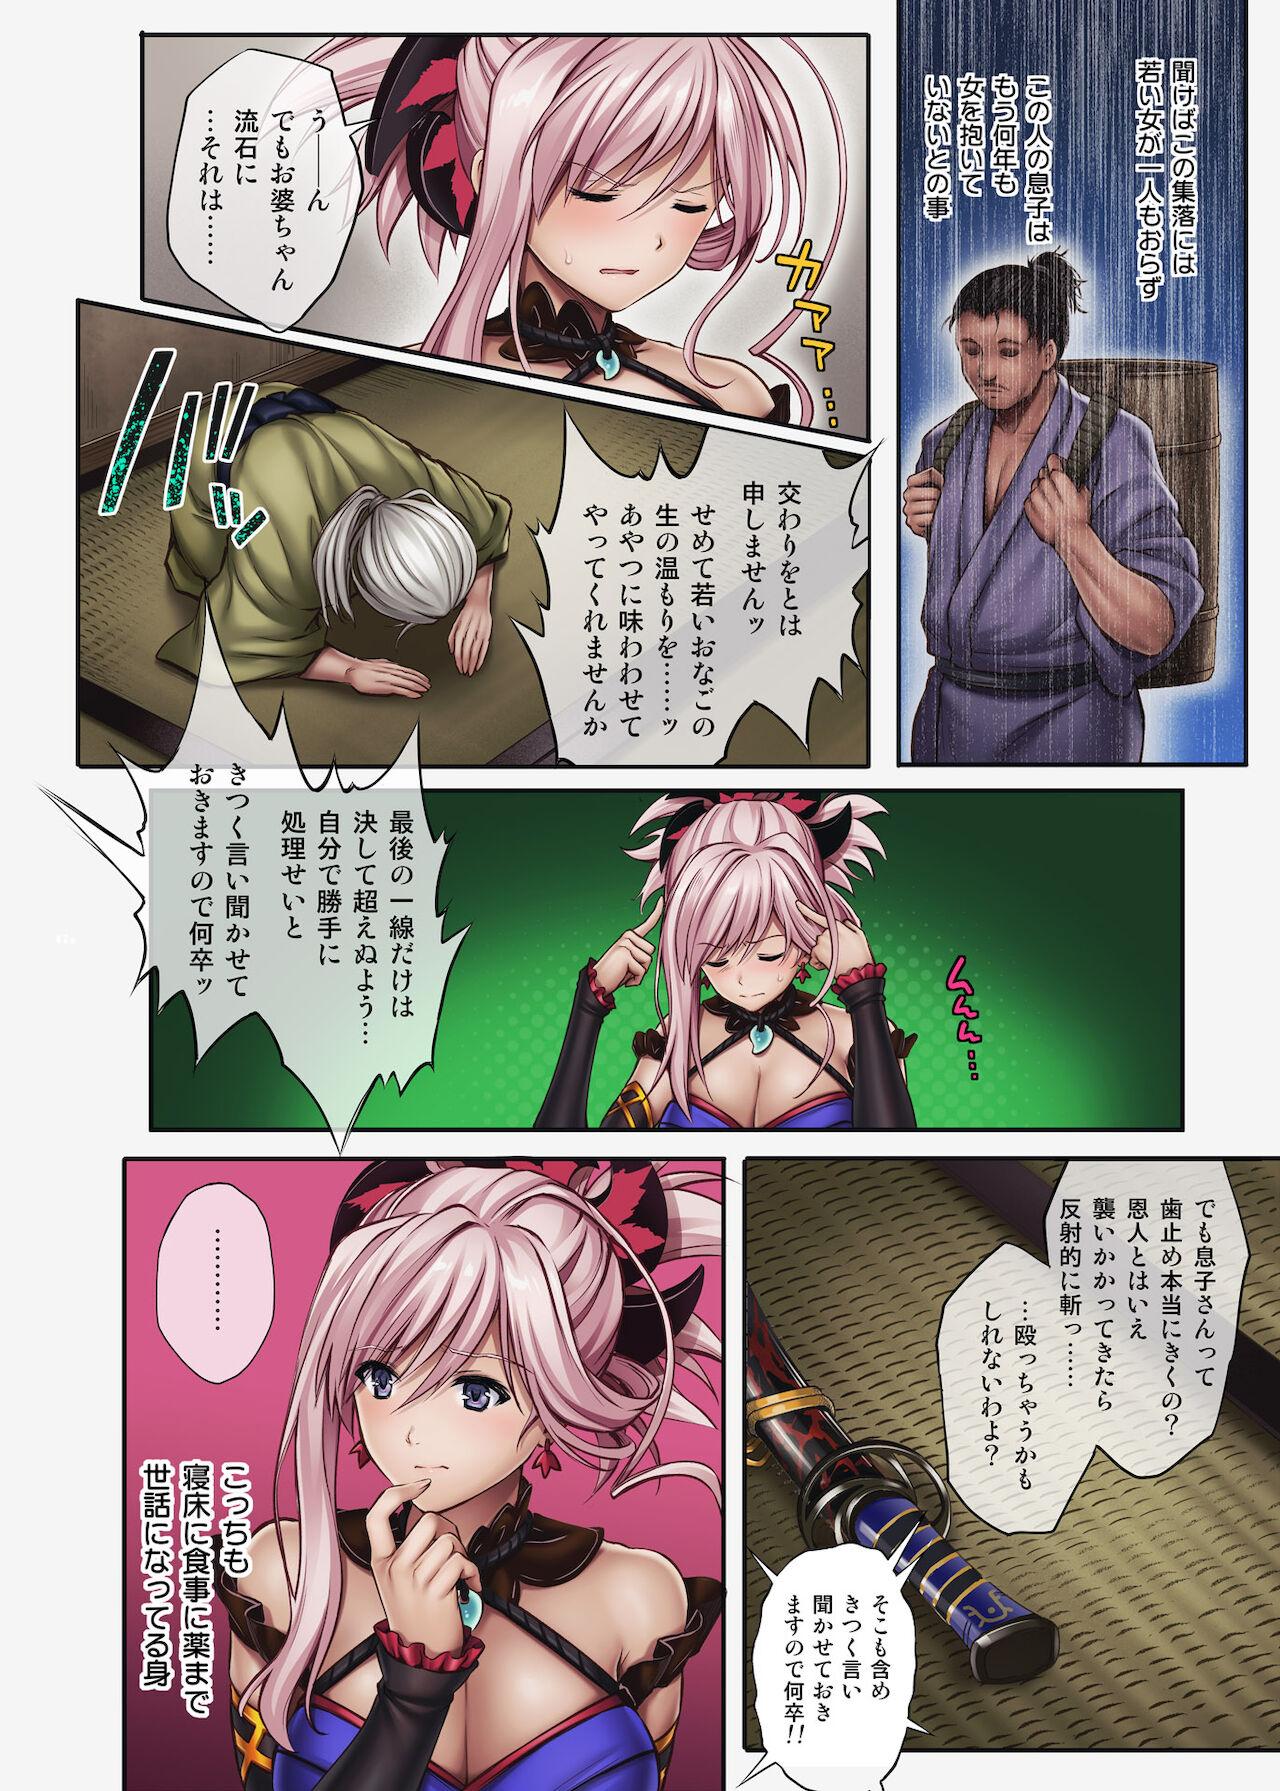 Tribbing Cyclone no Doujinshi Full Color Pack 4 - Fate grand order Sextoys - Page 9